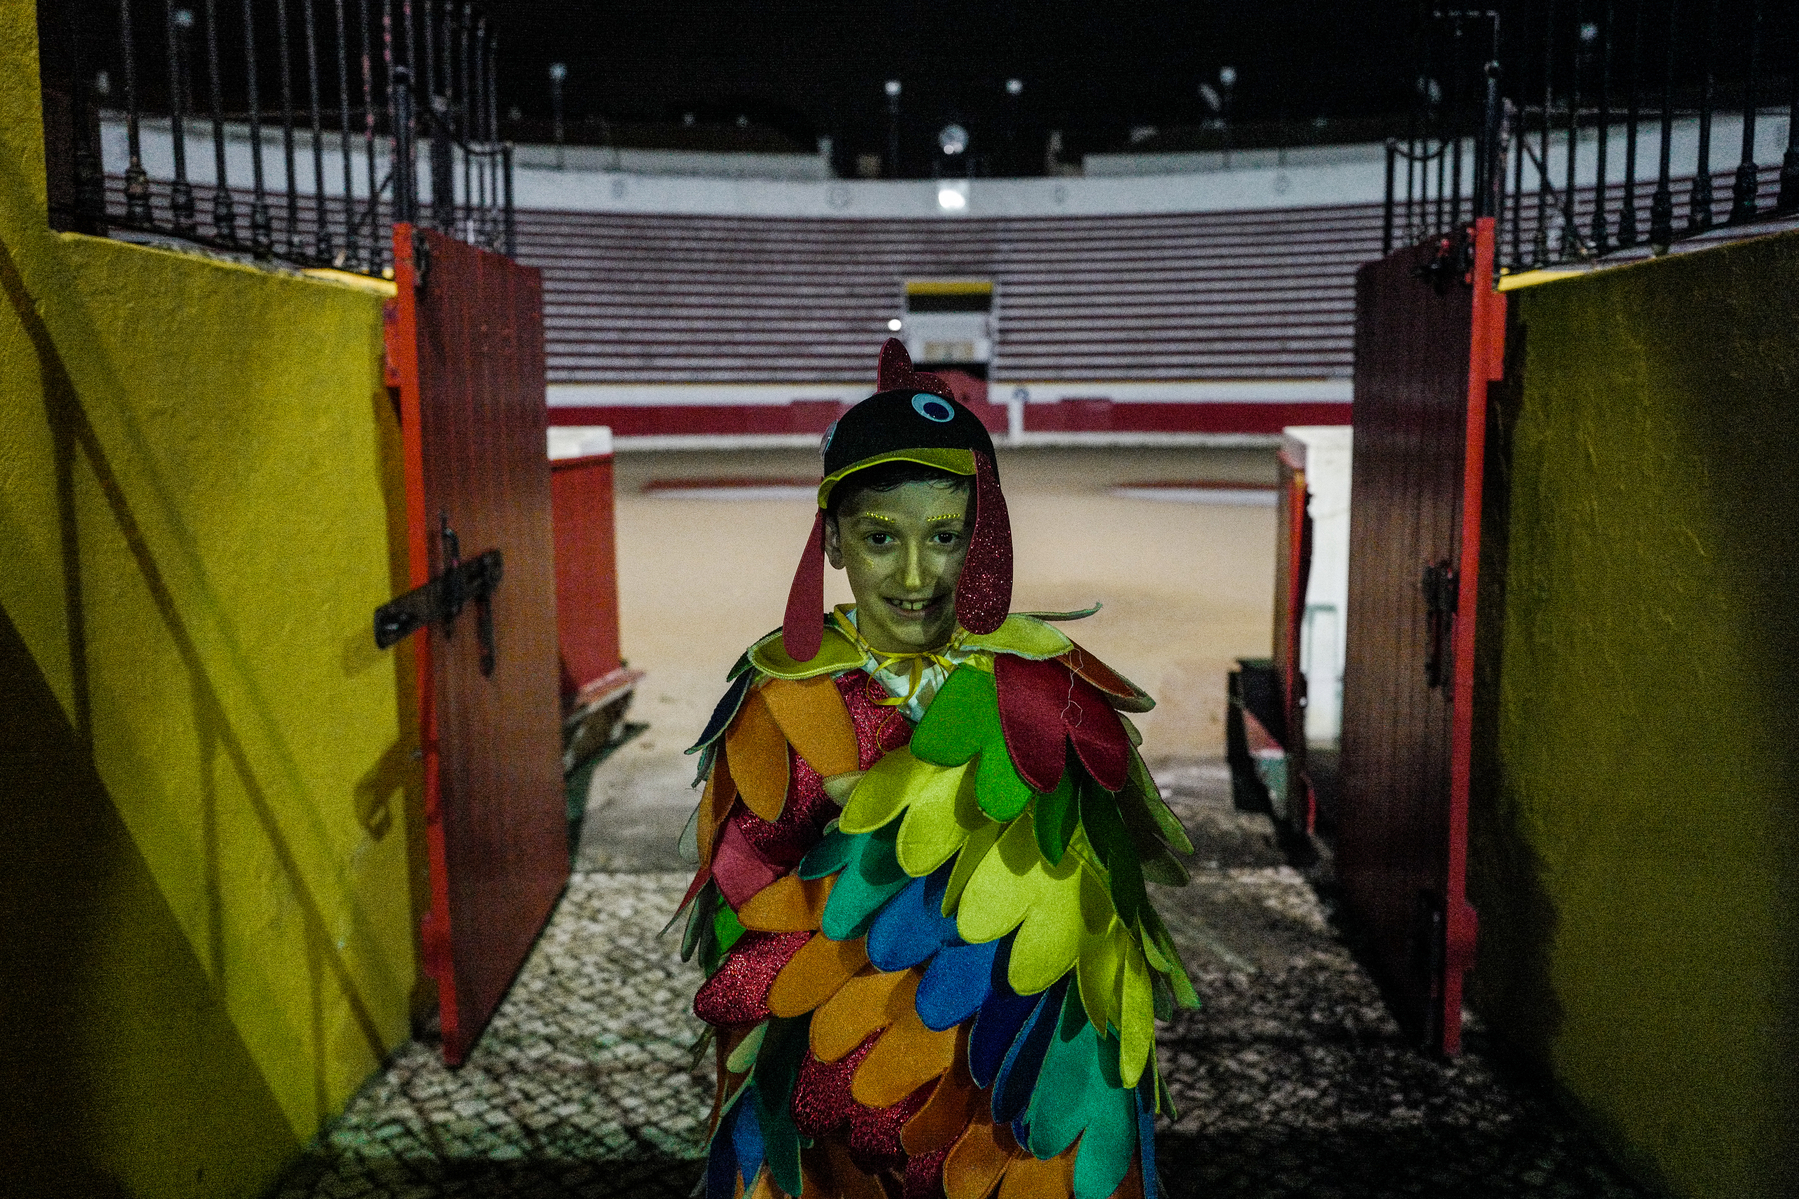 A child in a colorful bird costume stands at the entrance of a bullfighting arena at night.